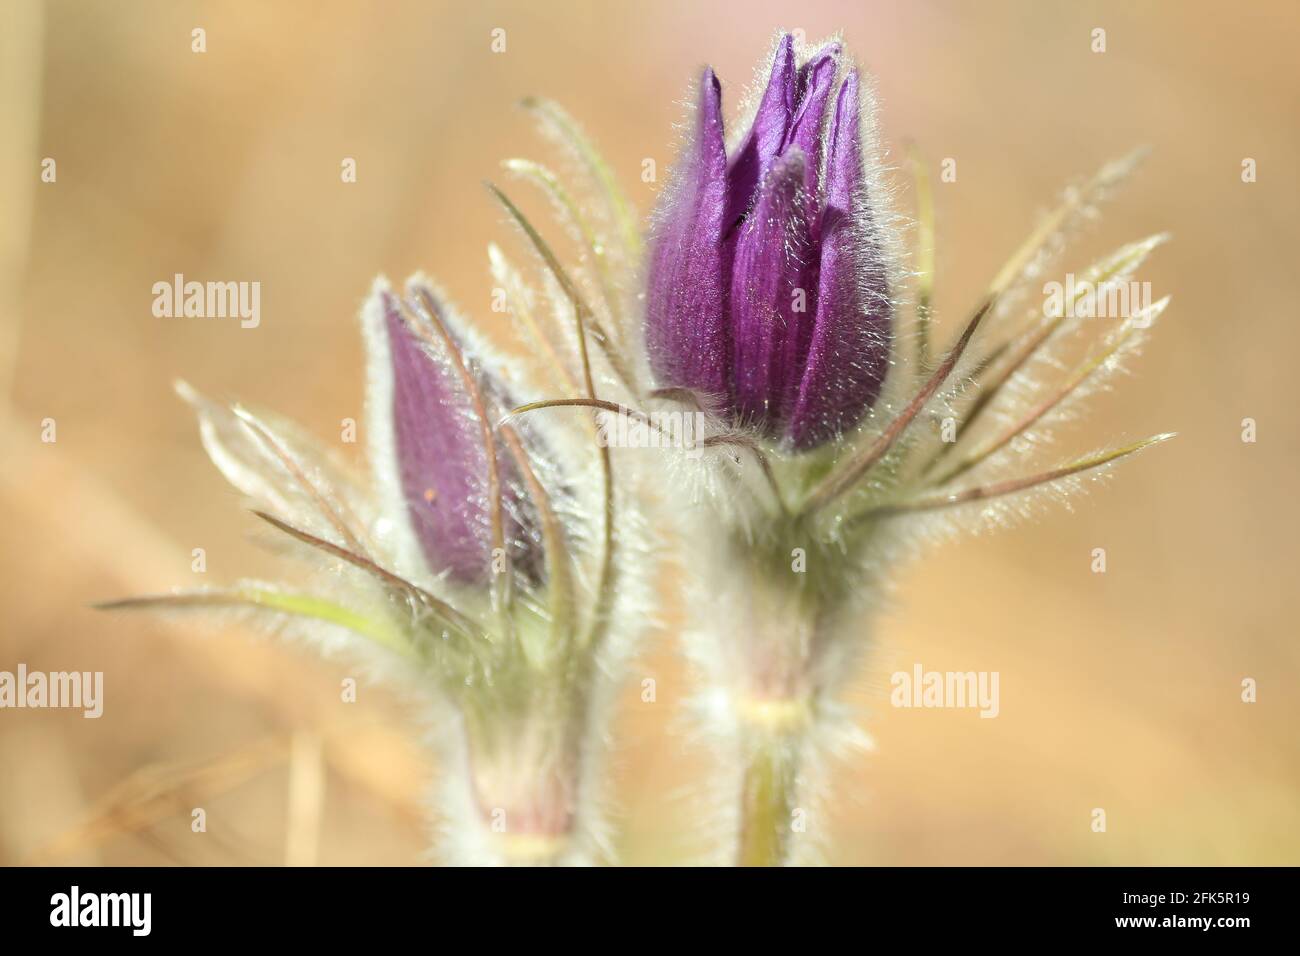 Pulsatilla patens, eastern pasqueflower, spreading anemone. Purple unopened buds of spring forest flowers with silvery villi sparkling in sunlight. Stock Photo